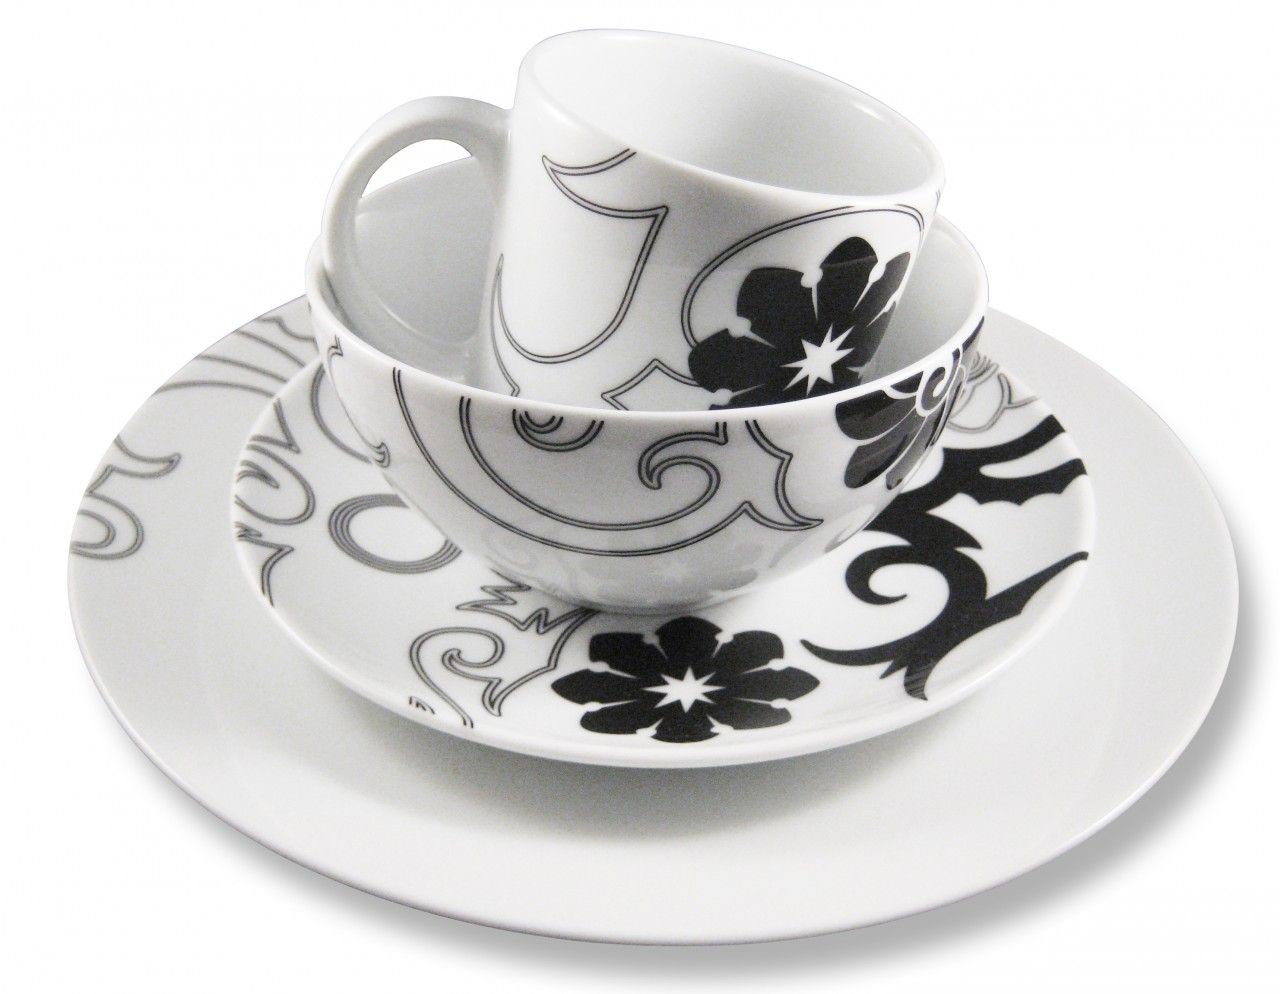 I'm just dying to get my hands on the brand new Tattoo Lotus place setting,